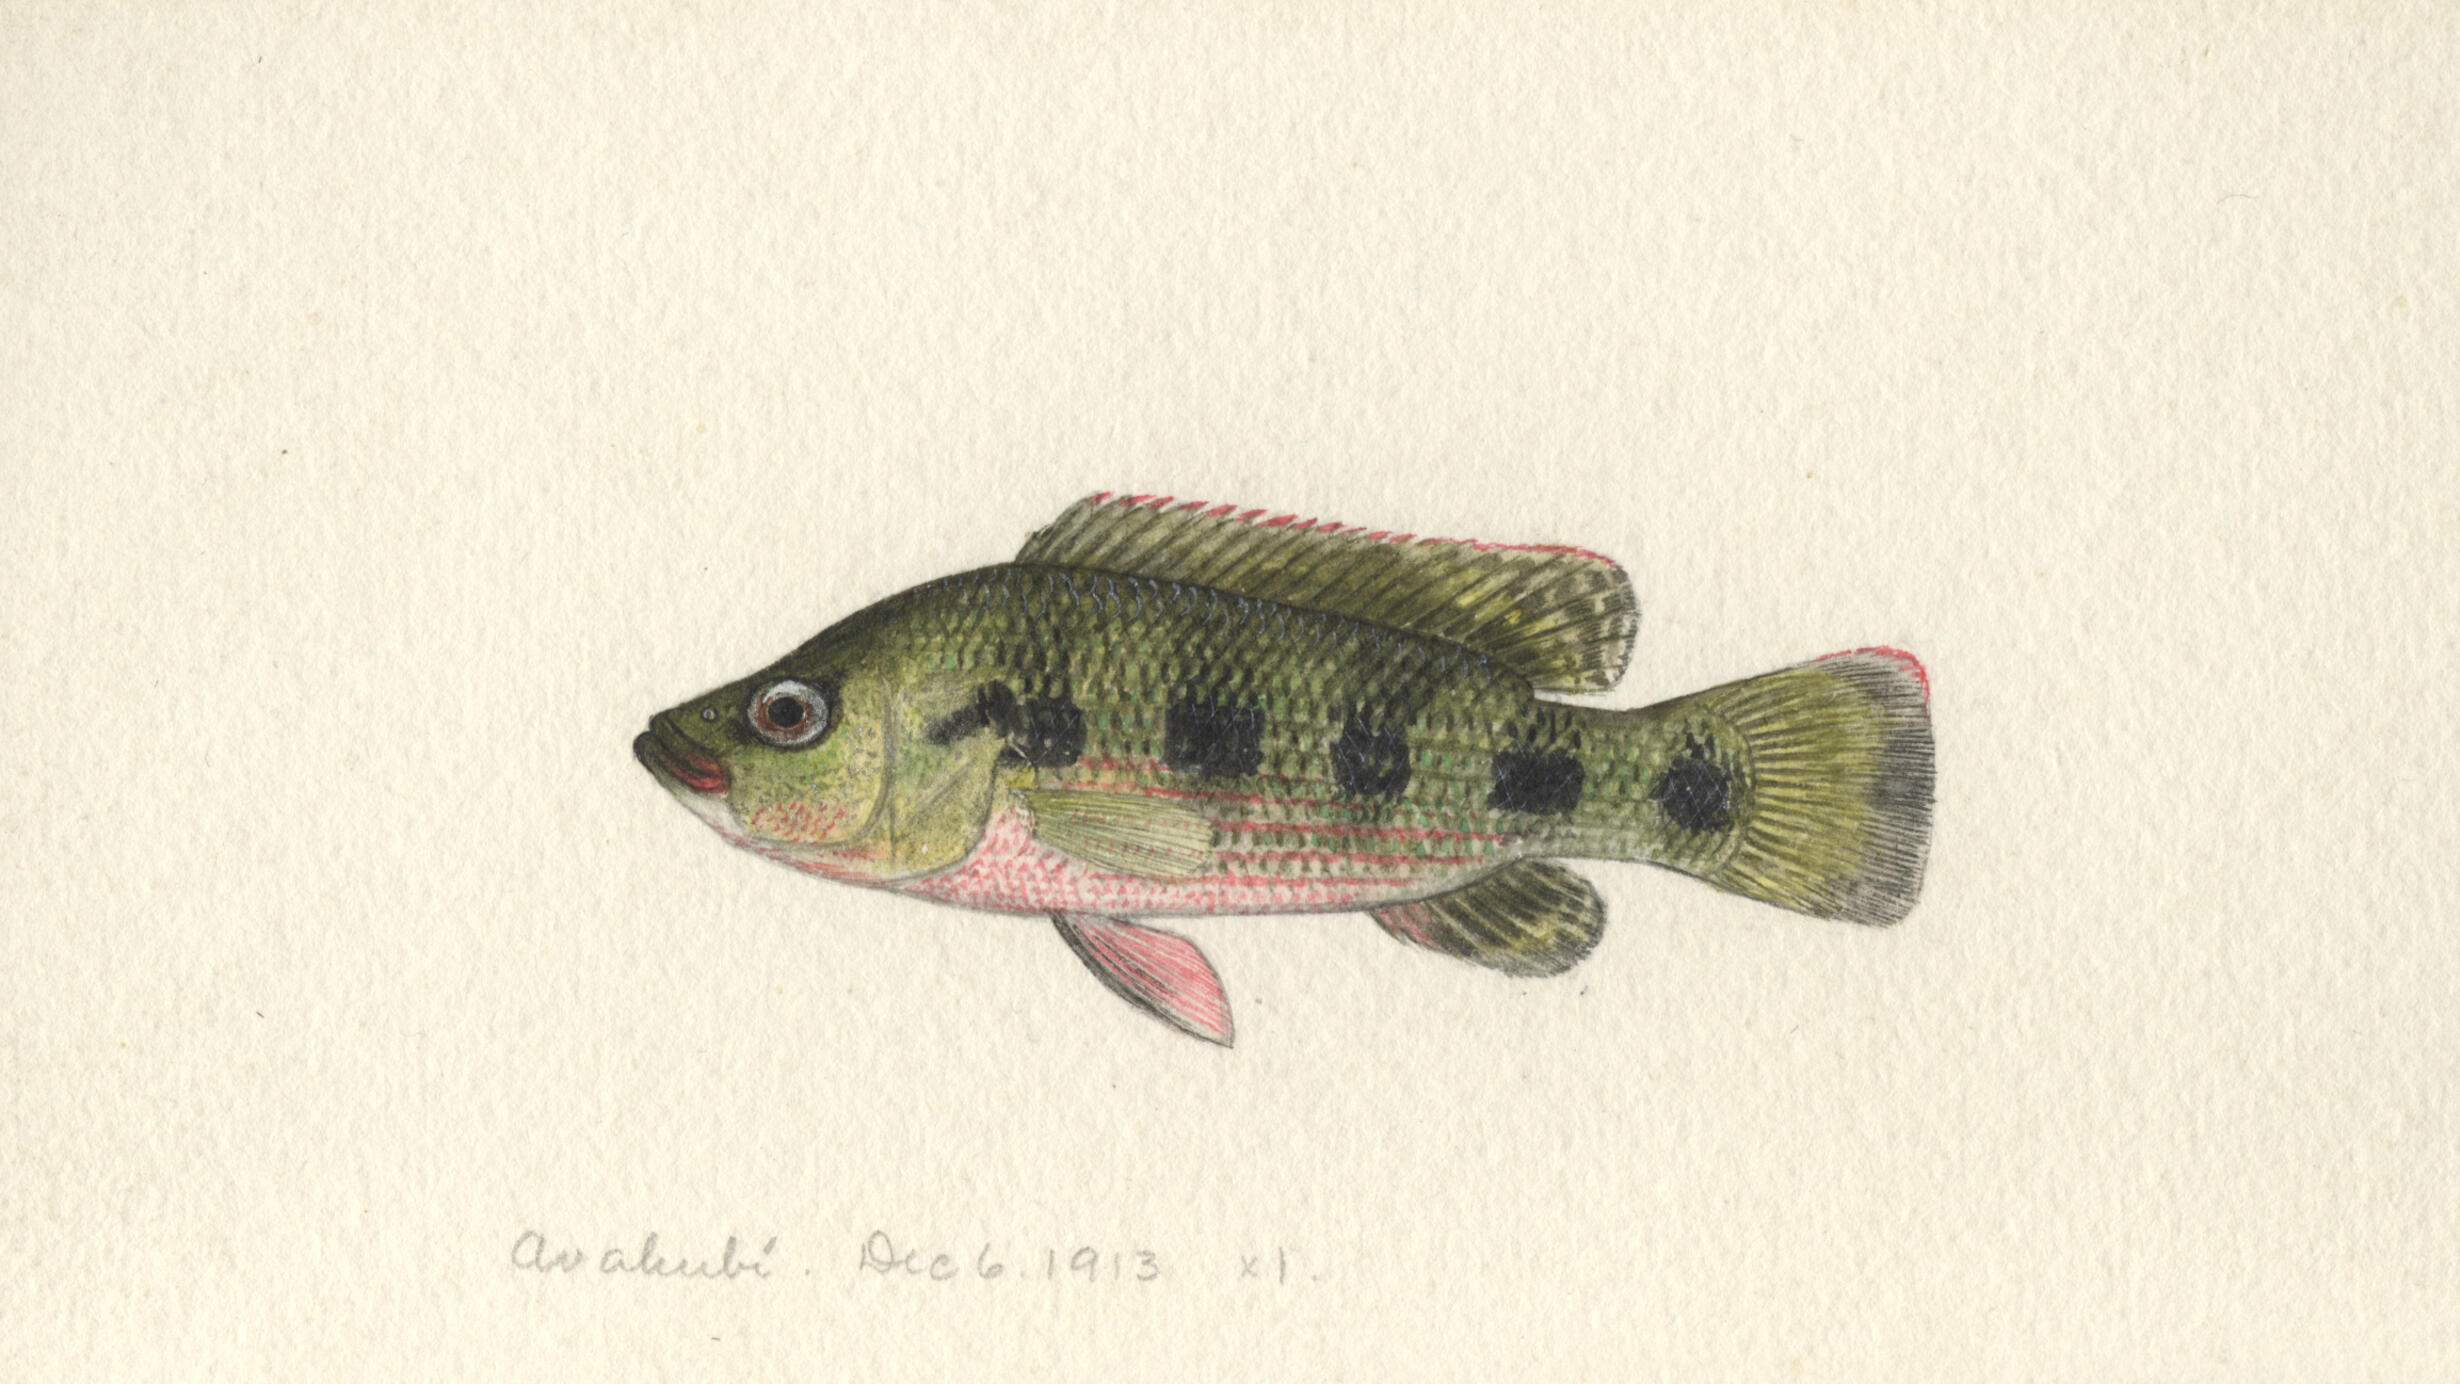 Watercolor painting of a green fish on paper.